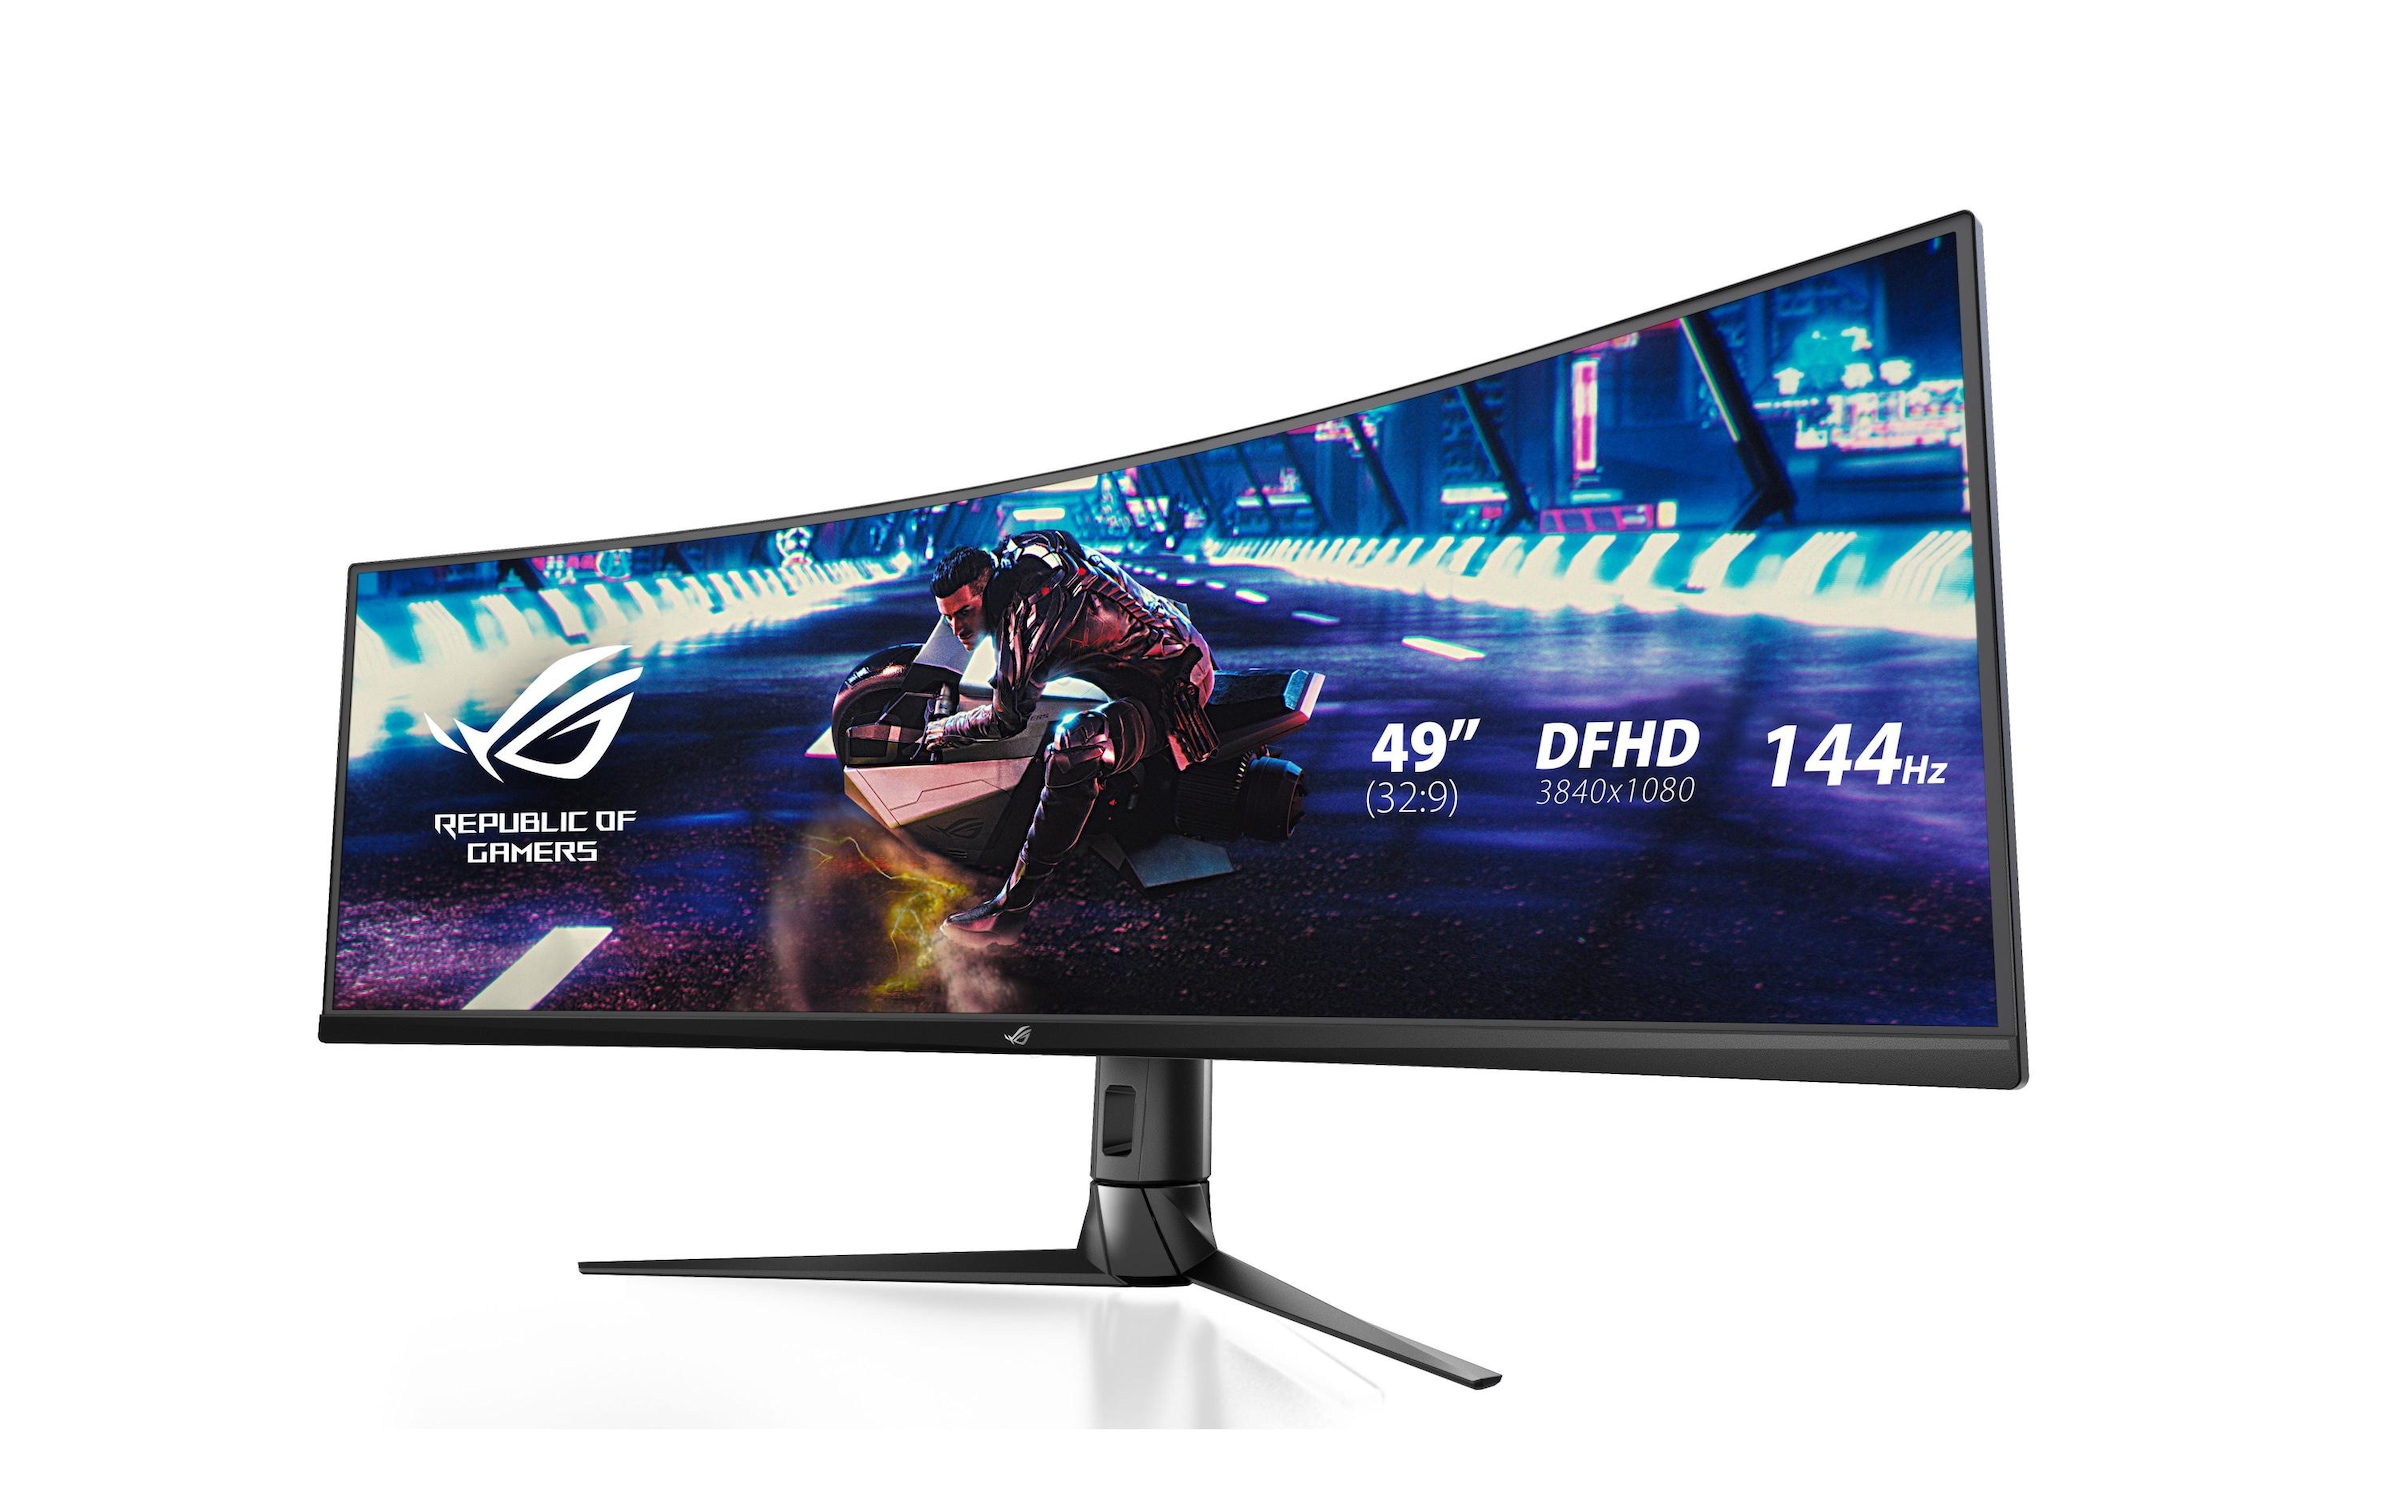 Asus Curved-Gaming-Monitor »ASUS XG49VQ 49 Curved 3840x1080, VA, 0,88125«, 123,97 cm/49 Zoll, 3840 x 1080 px, 4 ms Reaktionszeit, 144 Hz